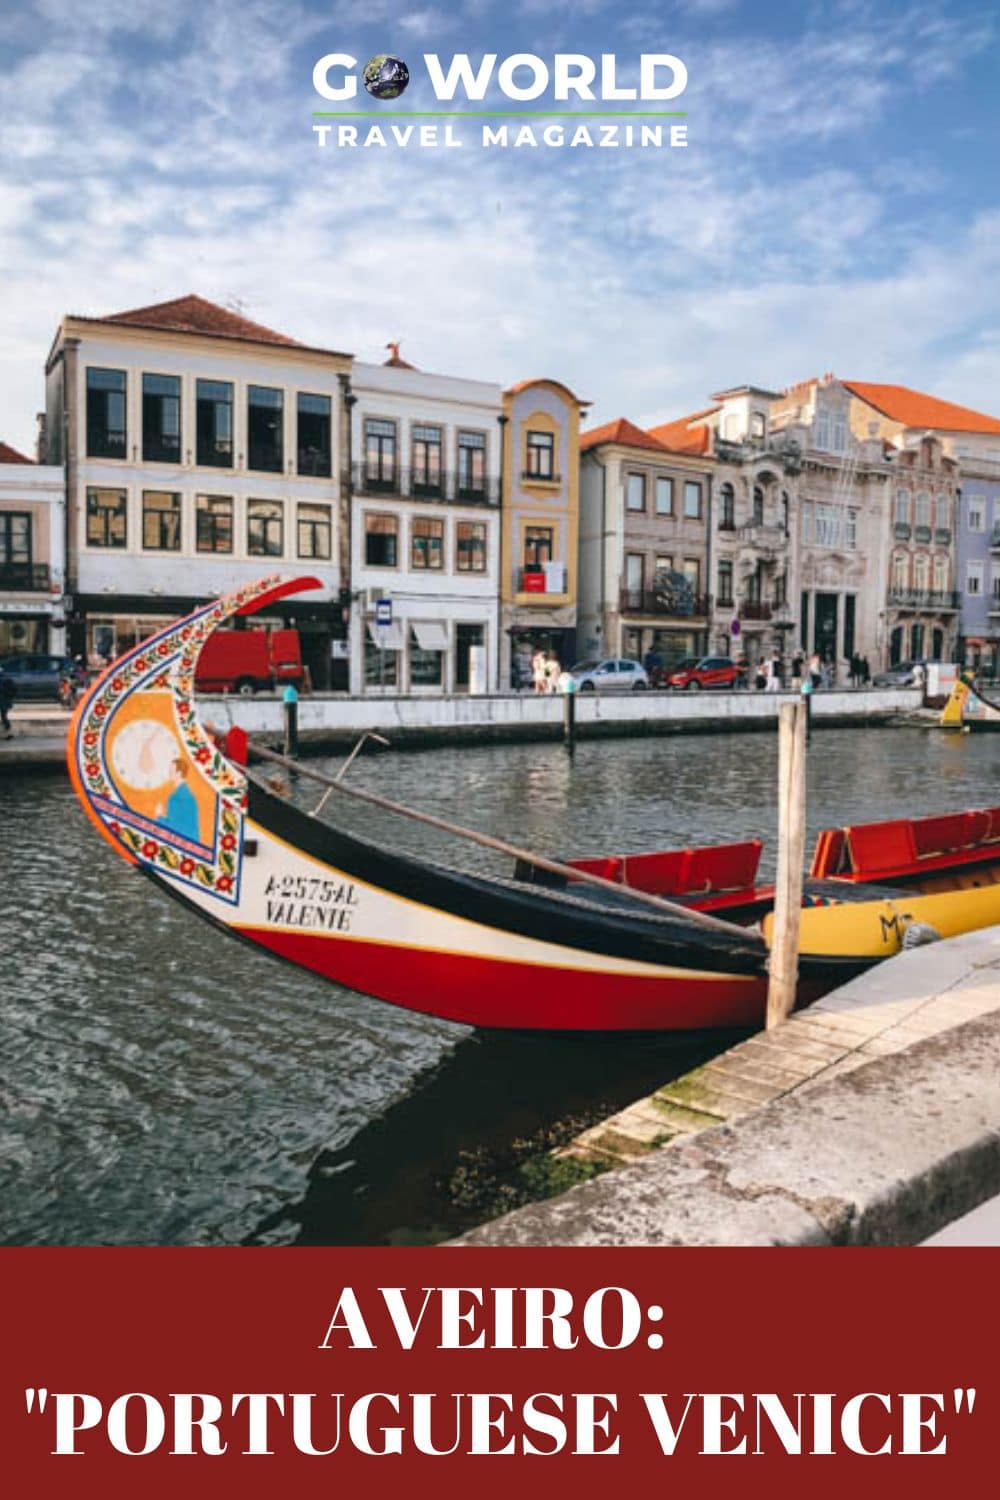 Nicknamed Portuguese Venice for its canals, Aveiro Portugal is more tranquil and boasts art nouveau, delicious seafood and charming squares. #portugal #aveiroportugal